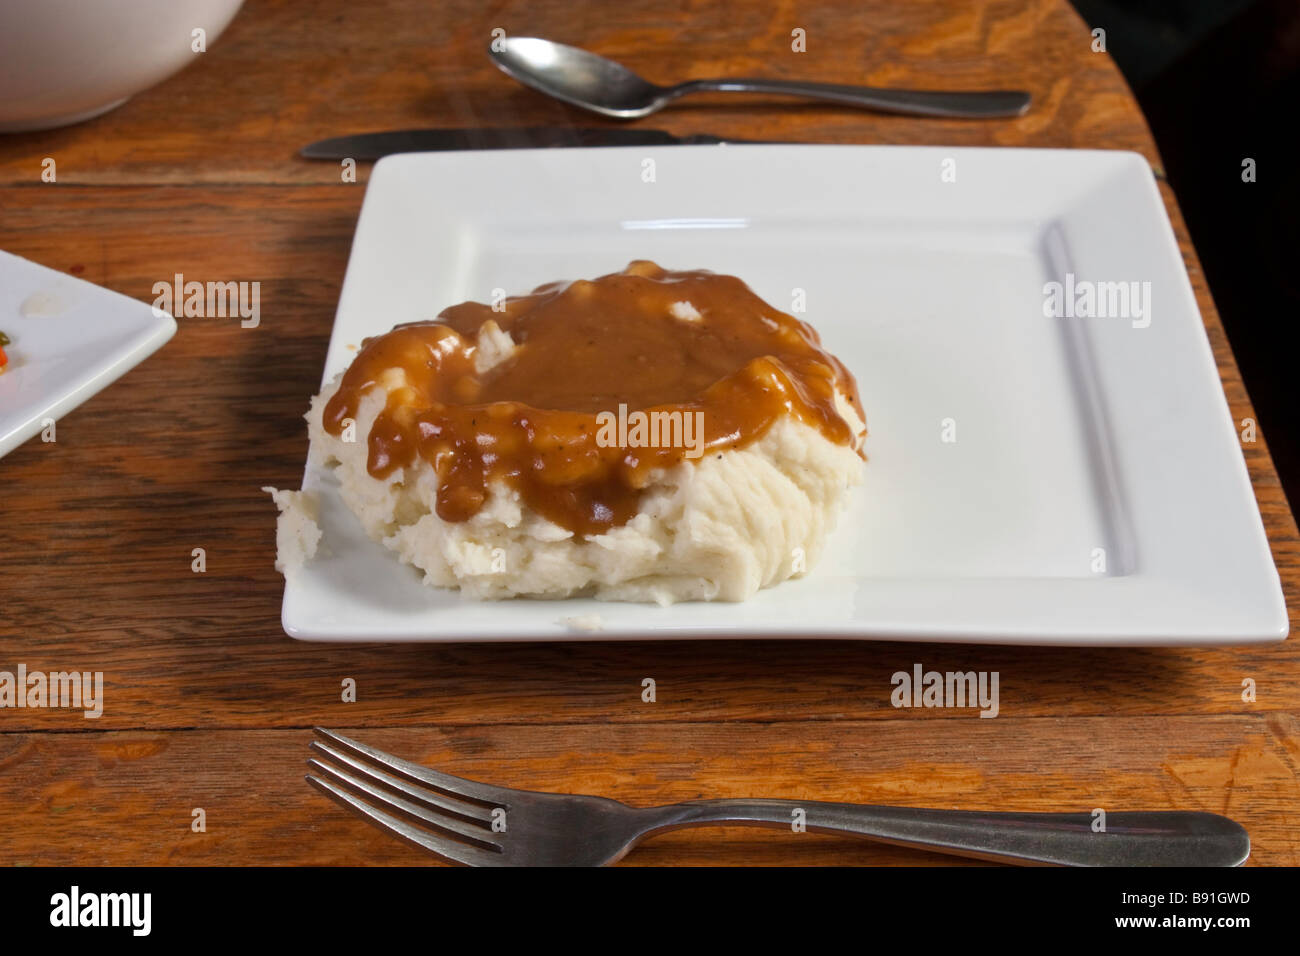 Mashed potatoes and gravy on a white plate Stock Photo